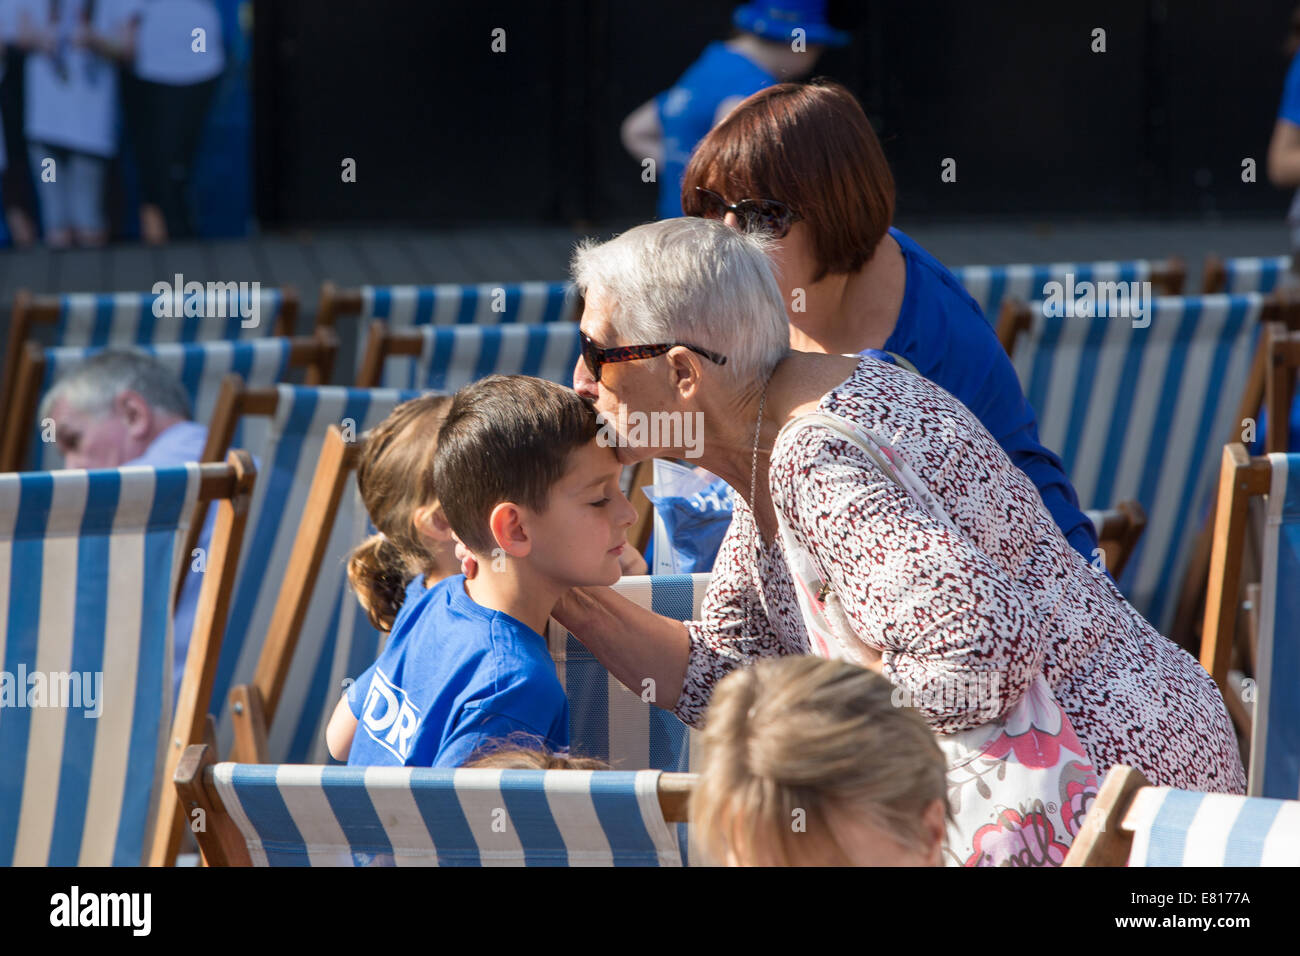 London, UK, 28th September 2014. The Juvenile Diabetes Research Foundation were well supported in both 5km and 9km walks across London’s Bridges to raise money to support their efforts to cure diabetes. Credit:  Neil Cordell/Alamy Live News Stock Photo